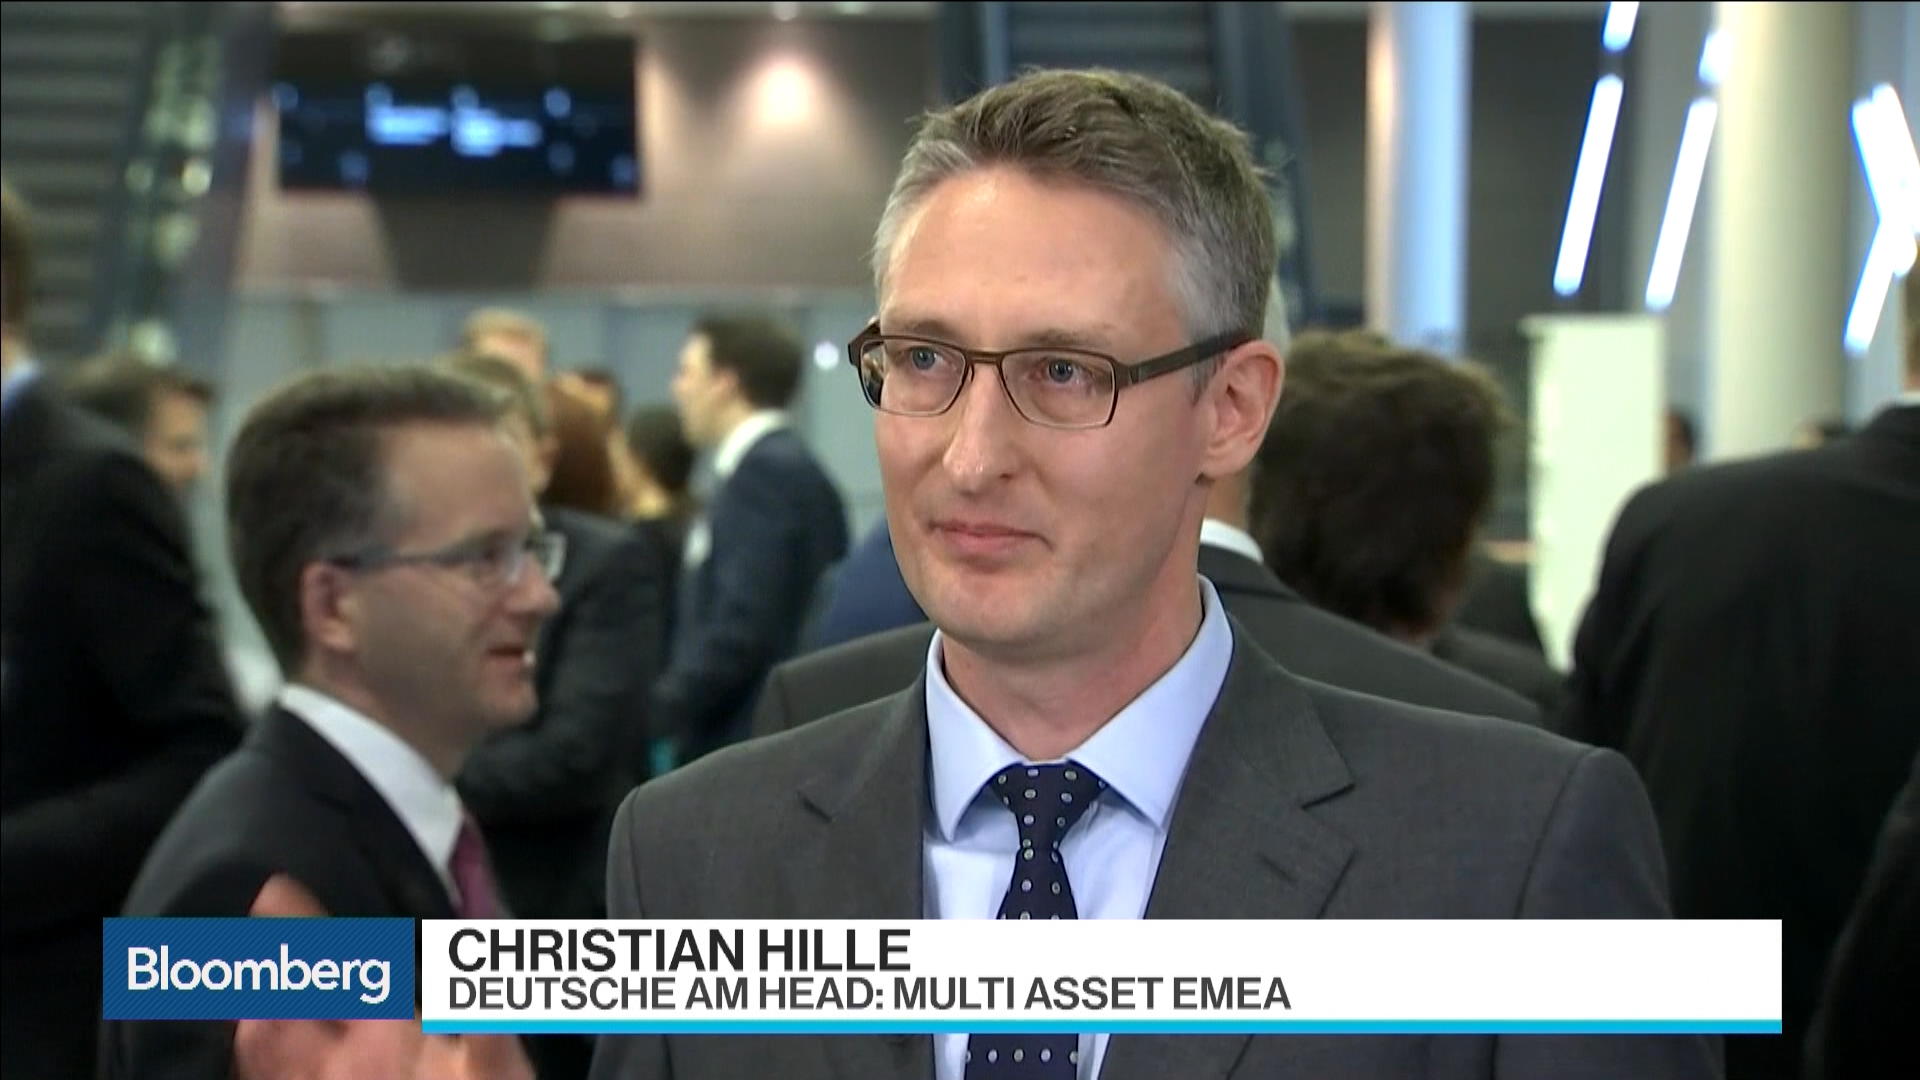 Watch Hille: We Don’t See the End of the Bond Bull Market - Bloomberg